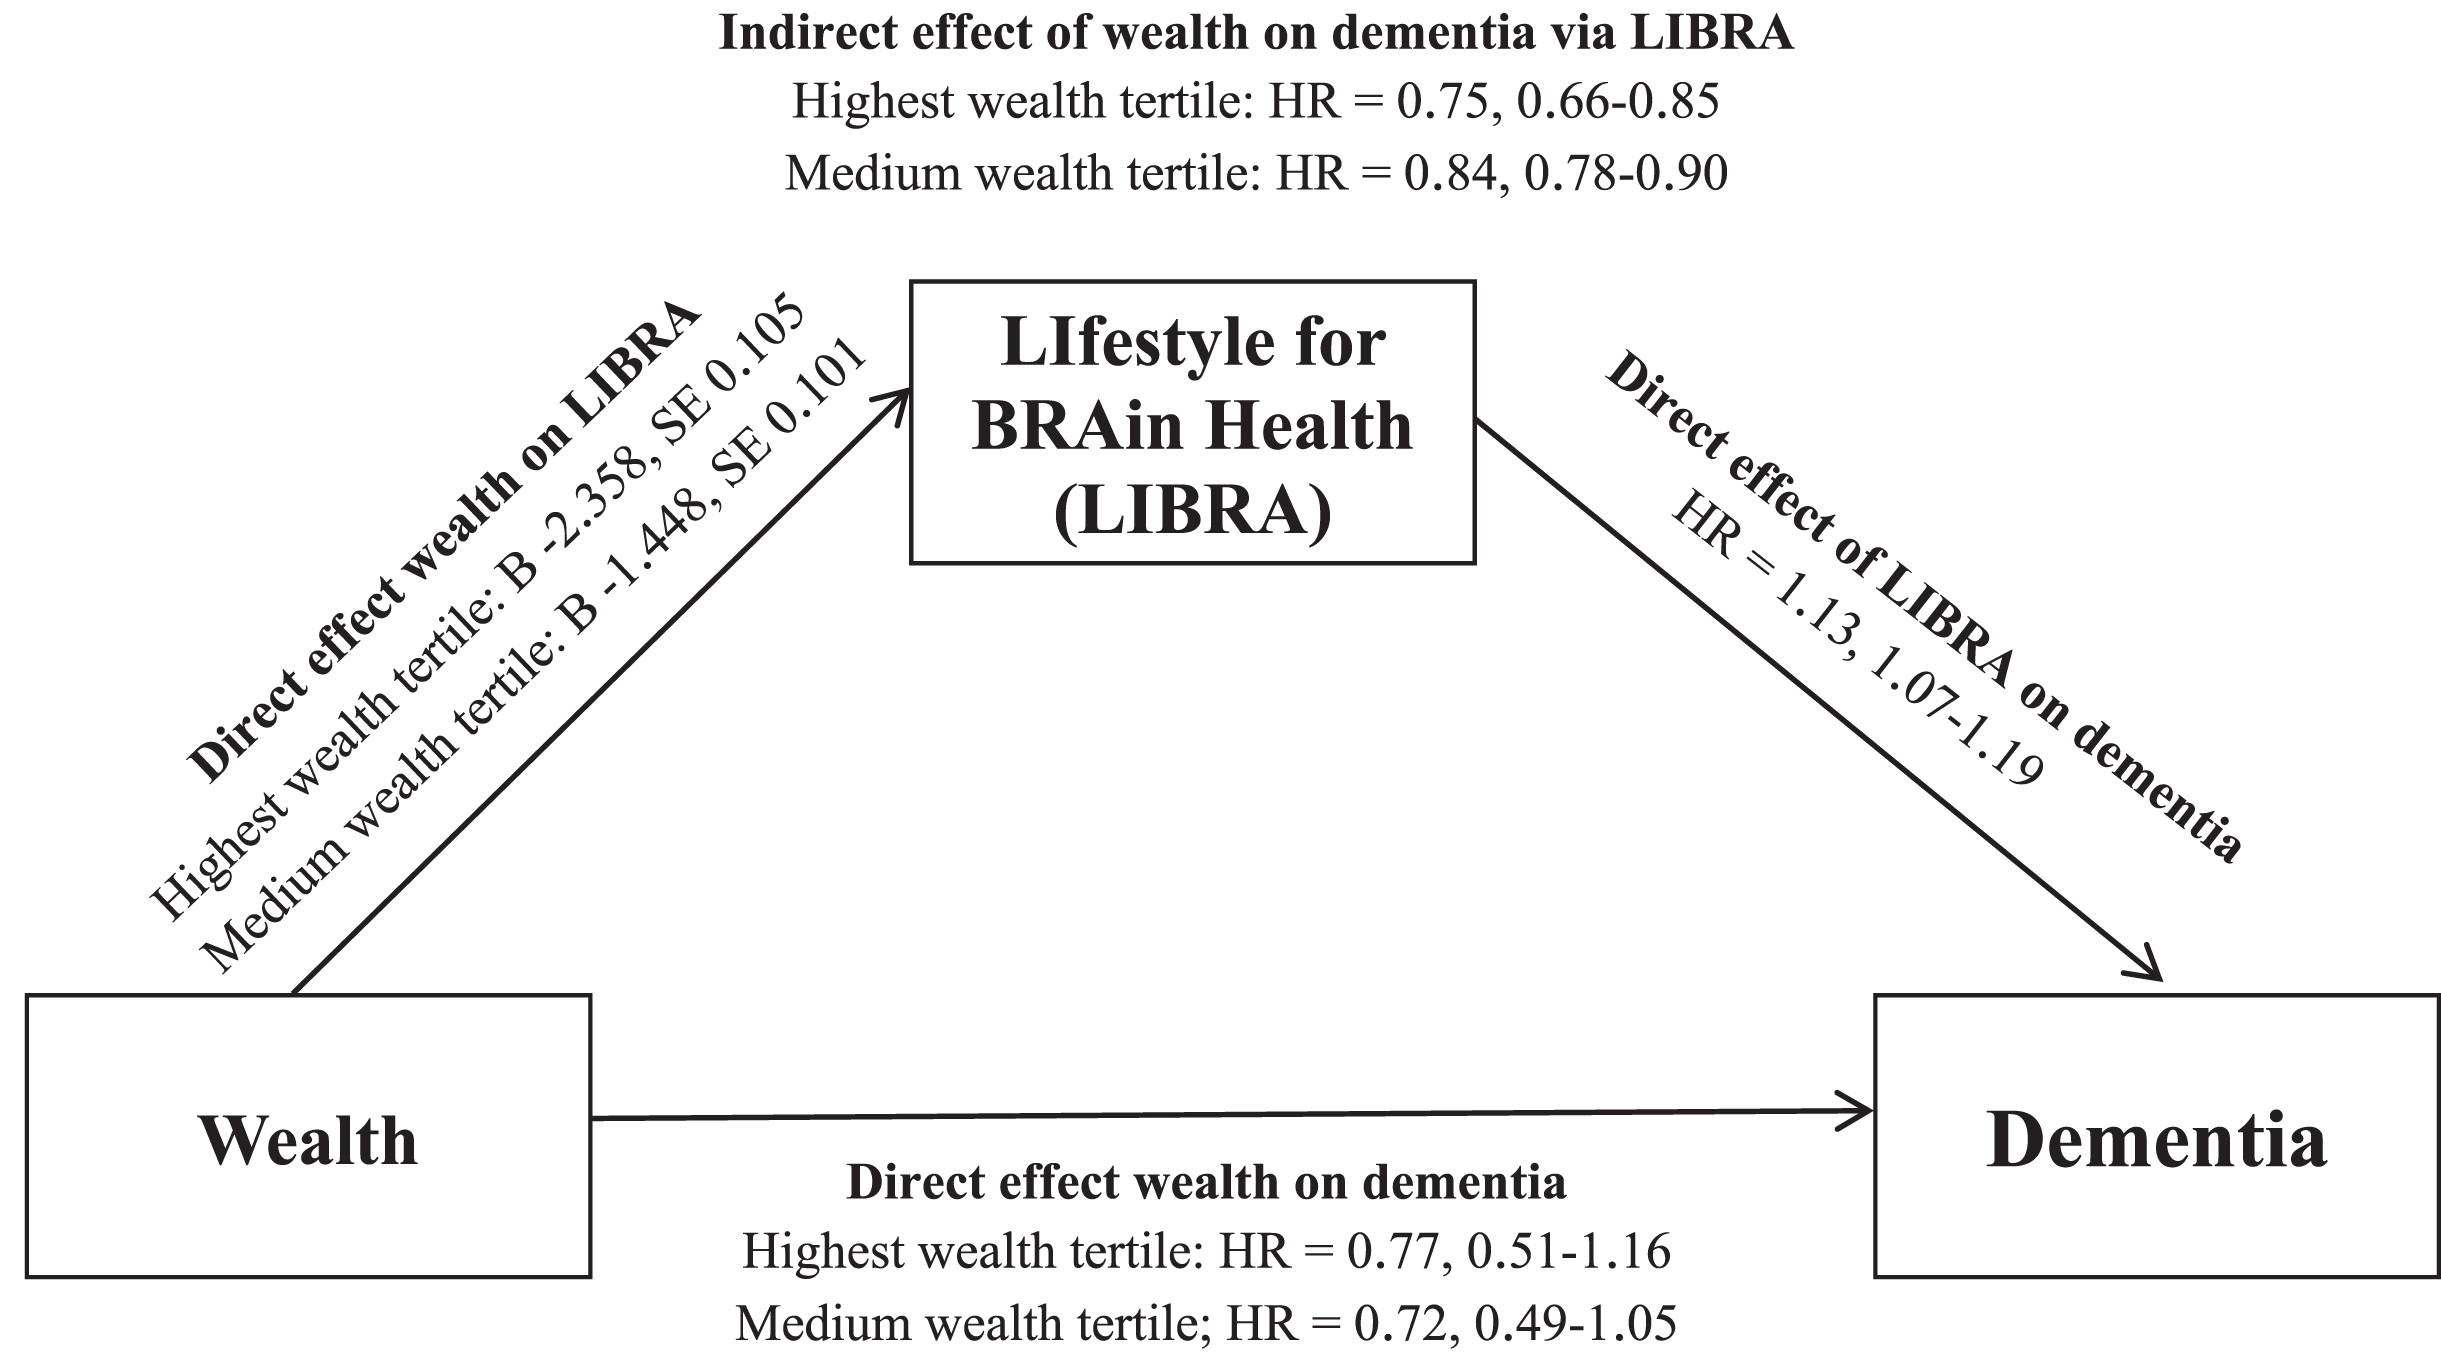 Mediation analysis for the relationship between wealth and dementia as mediated by LIBRA. B, unstandardized regression coefficient; HR, hazard ratio; SE, standard error.